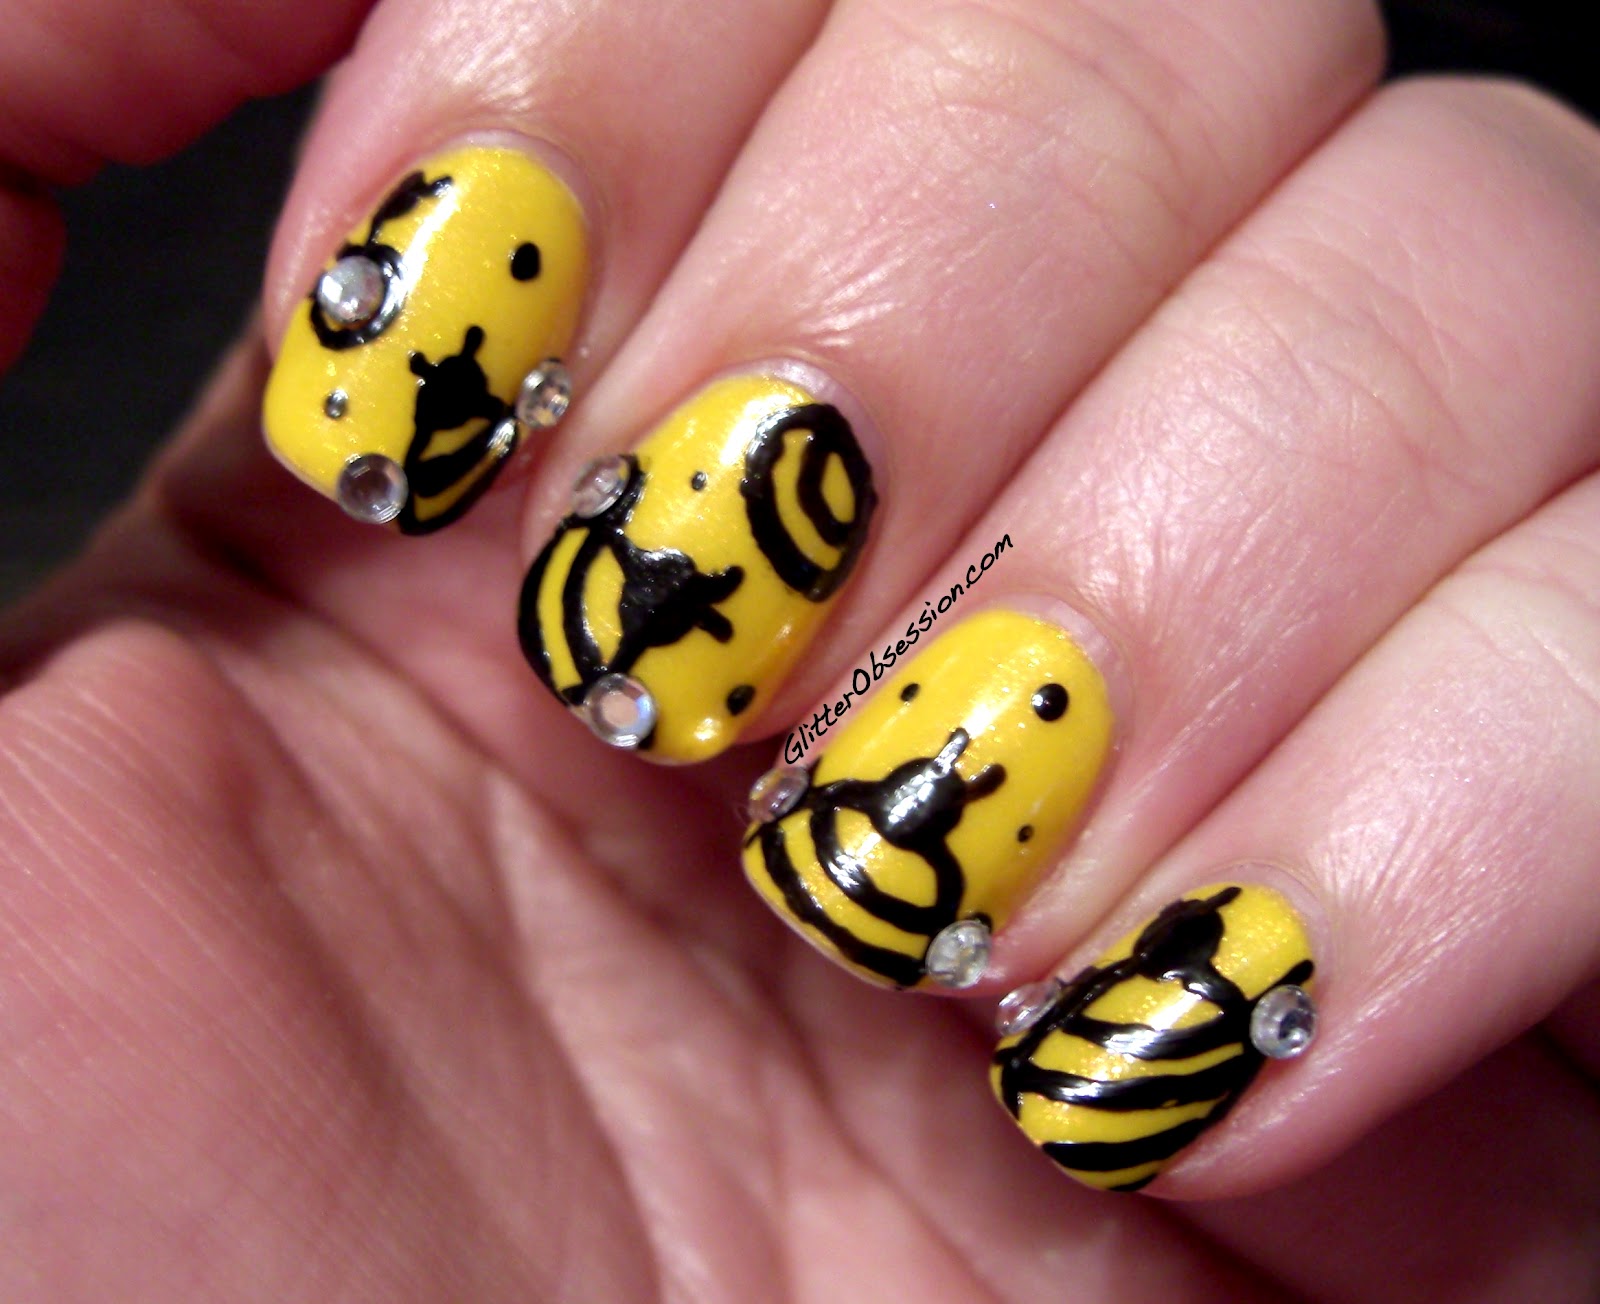 1. "Easy Bumble Bee Nail Art Tutorial" - wide 3